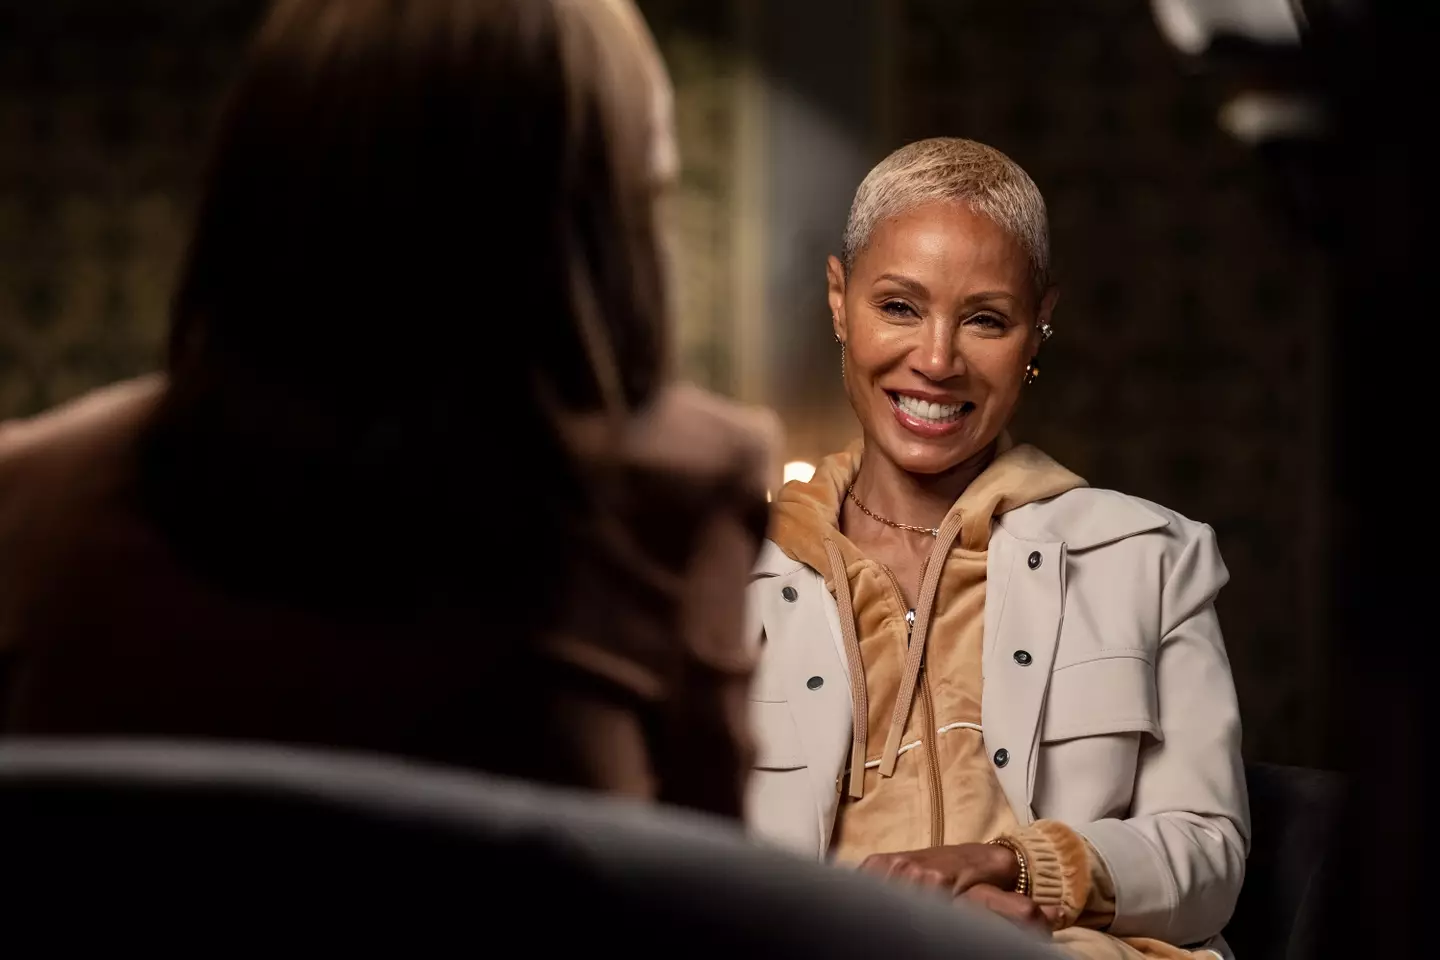 Jada Pinkett Smith has opened up about how she was blamed for the slap.